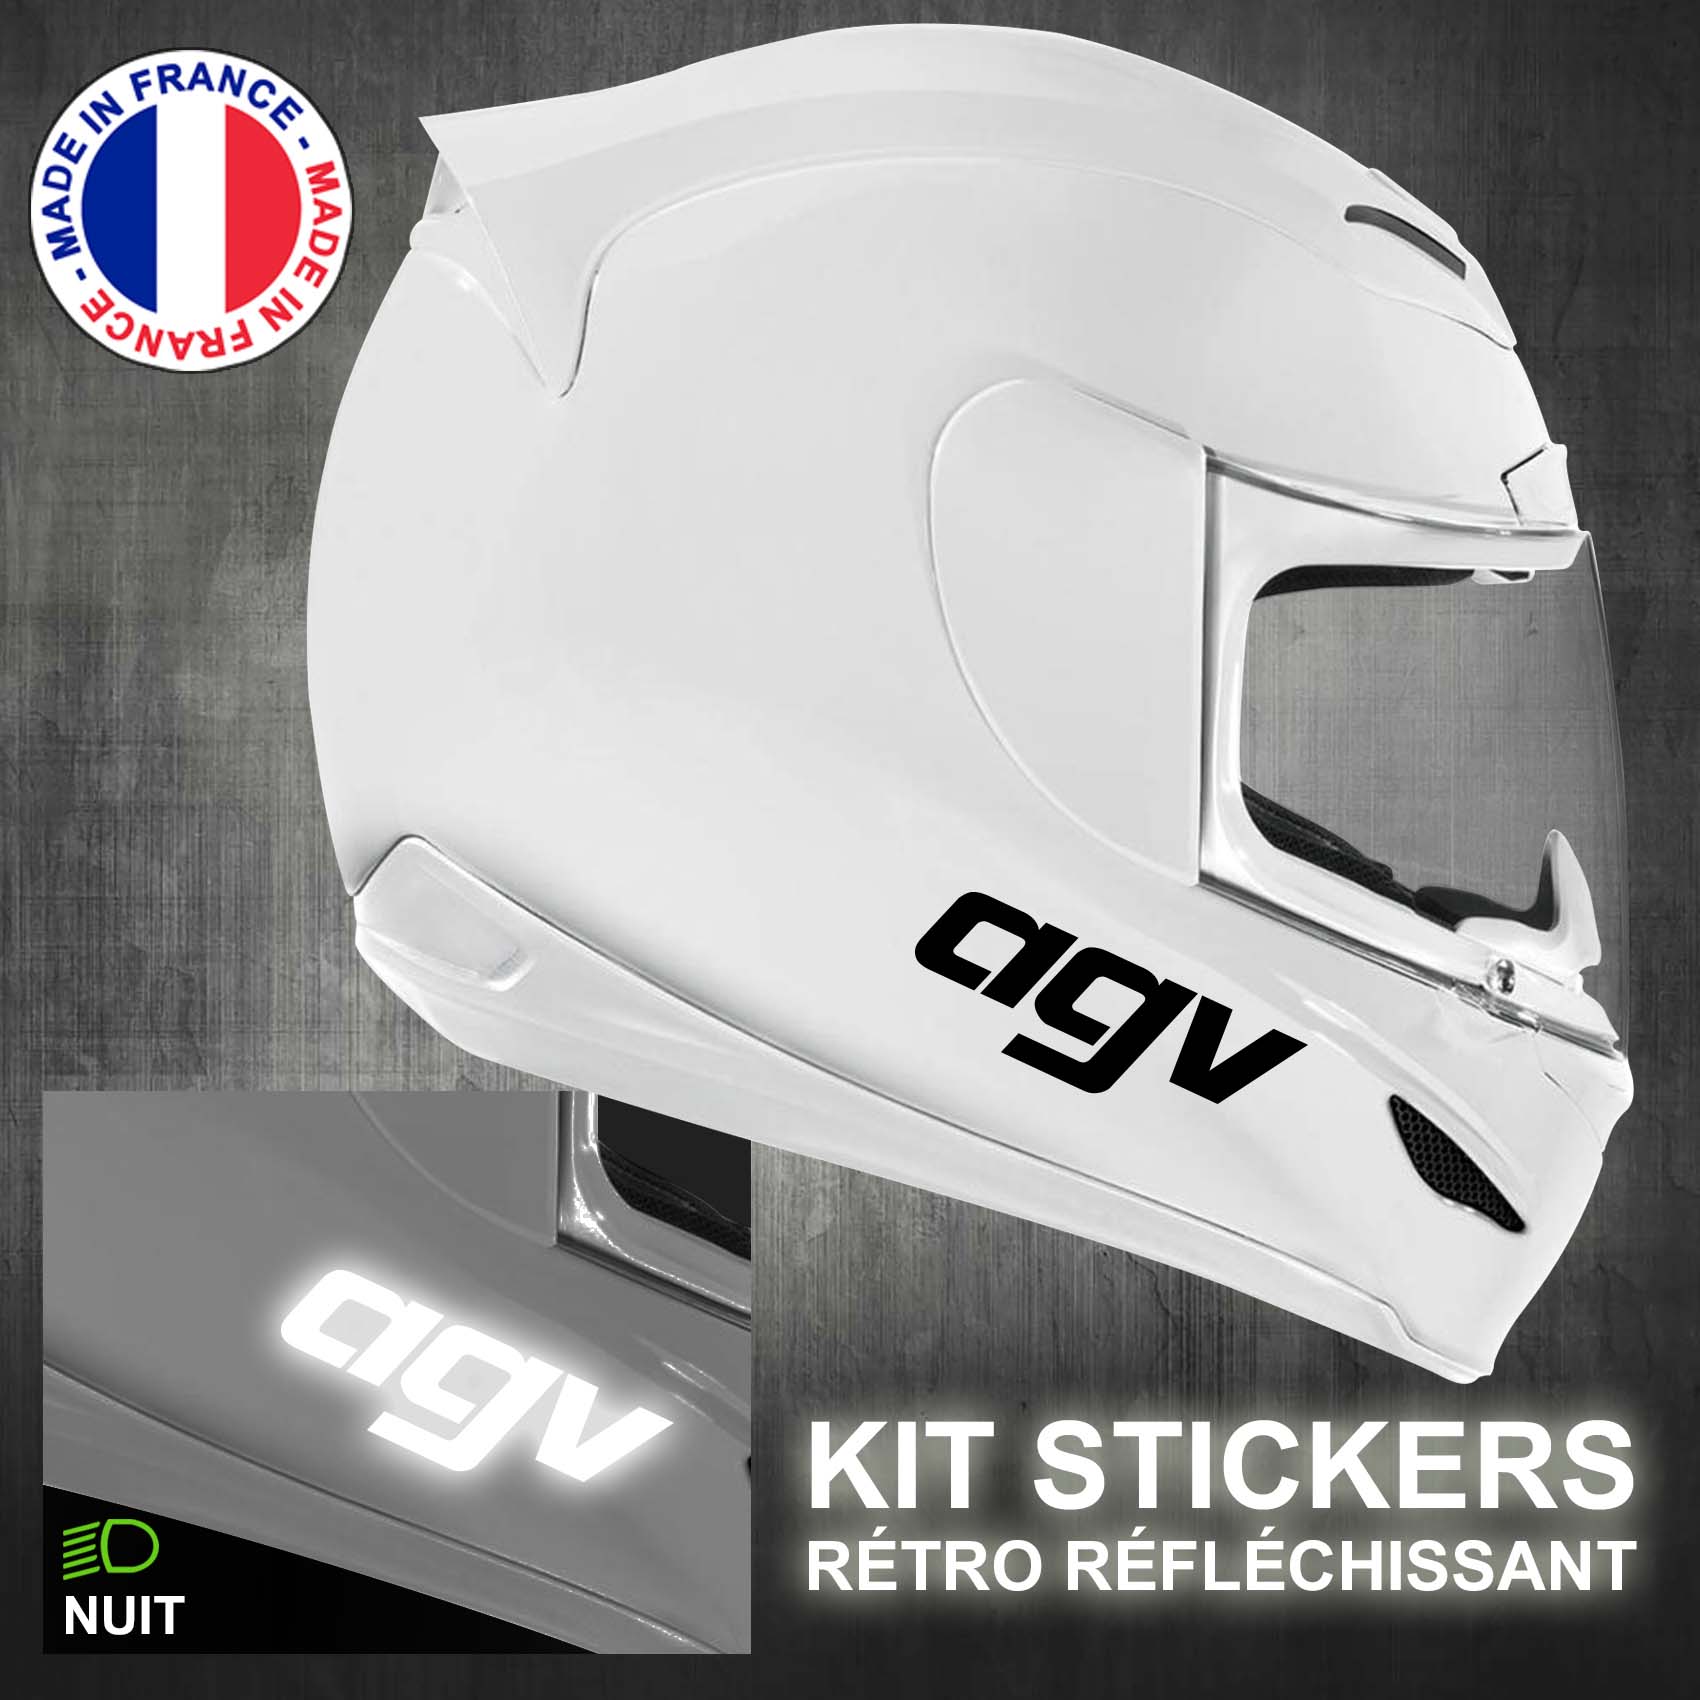 stickers-casque-moto-agv-ref2-retro-reflechissant-autocollant-blanc-moto-velo-tuning-racing-route-sticker-casques-adhesif-scooter-nuit-securite-decals-personnalise-personnalisable-min